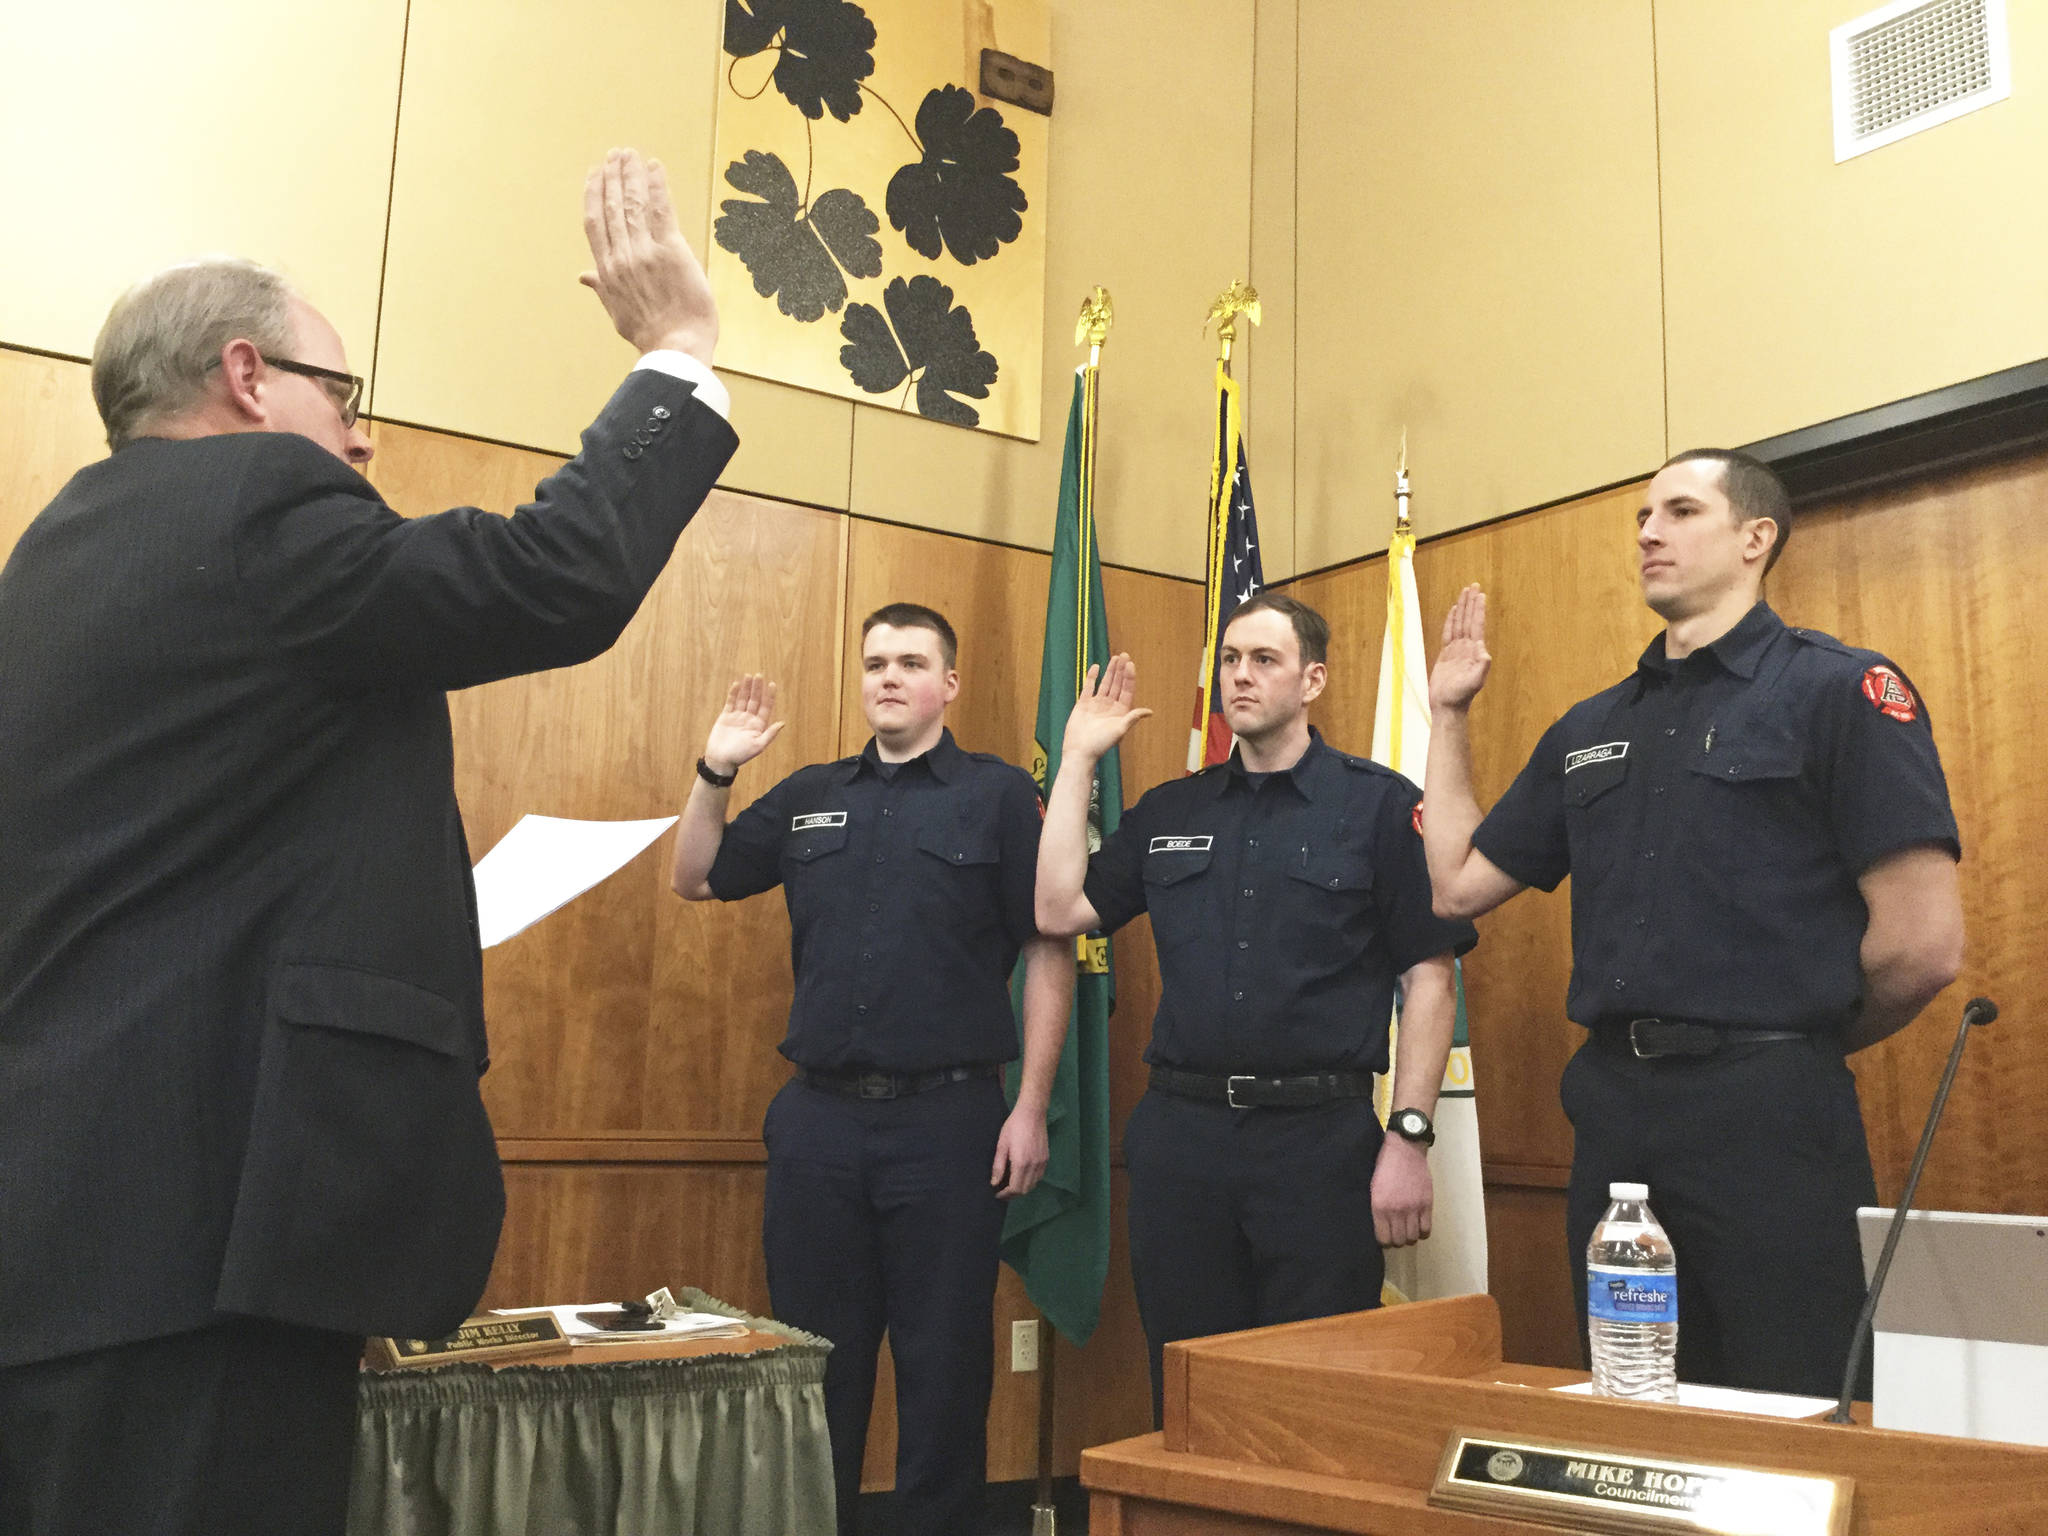 Arlington welcomes newest full-time firefighters Zachary Hanson, Aaron Boede and Paul Lizarraga